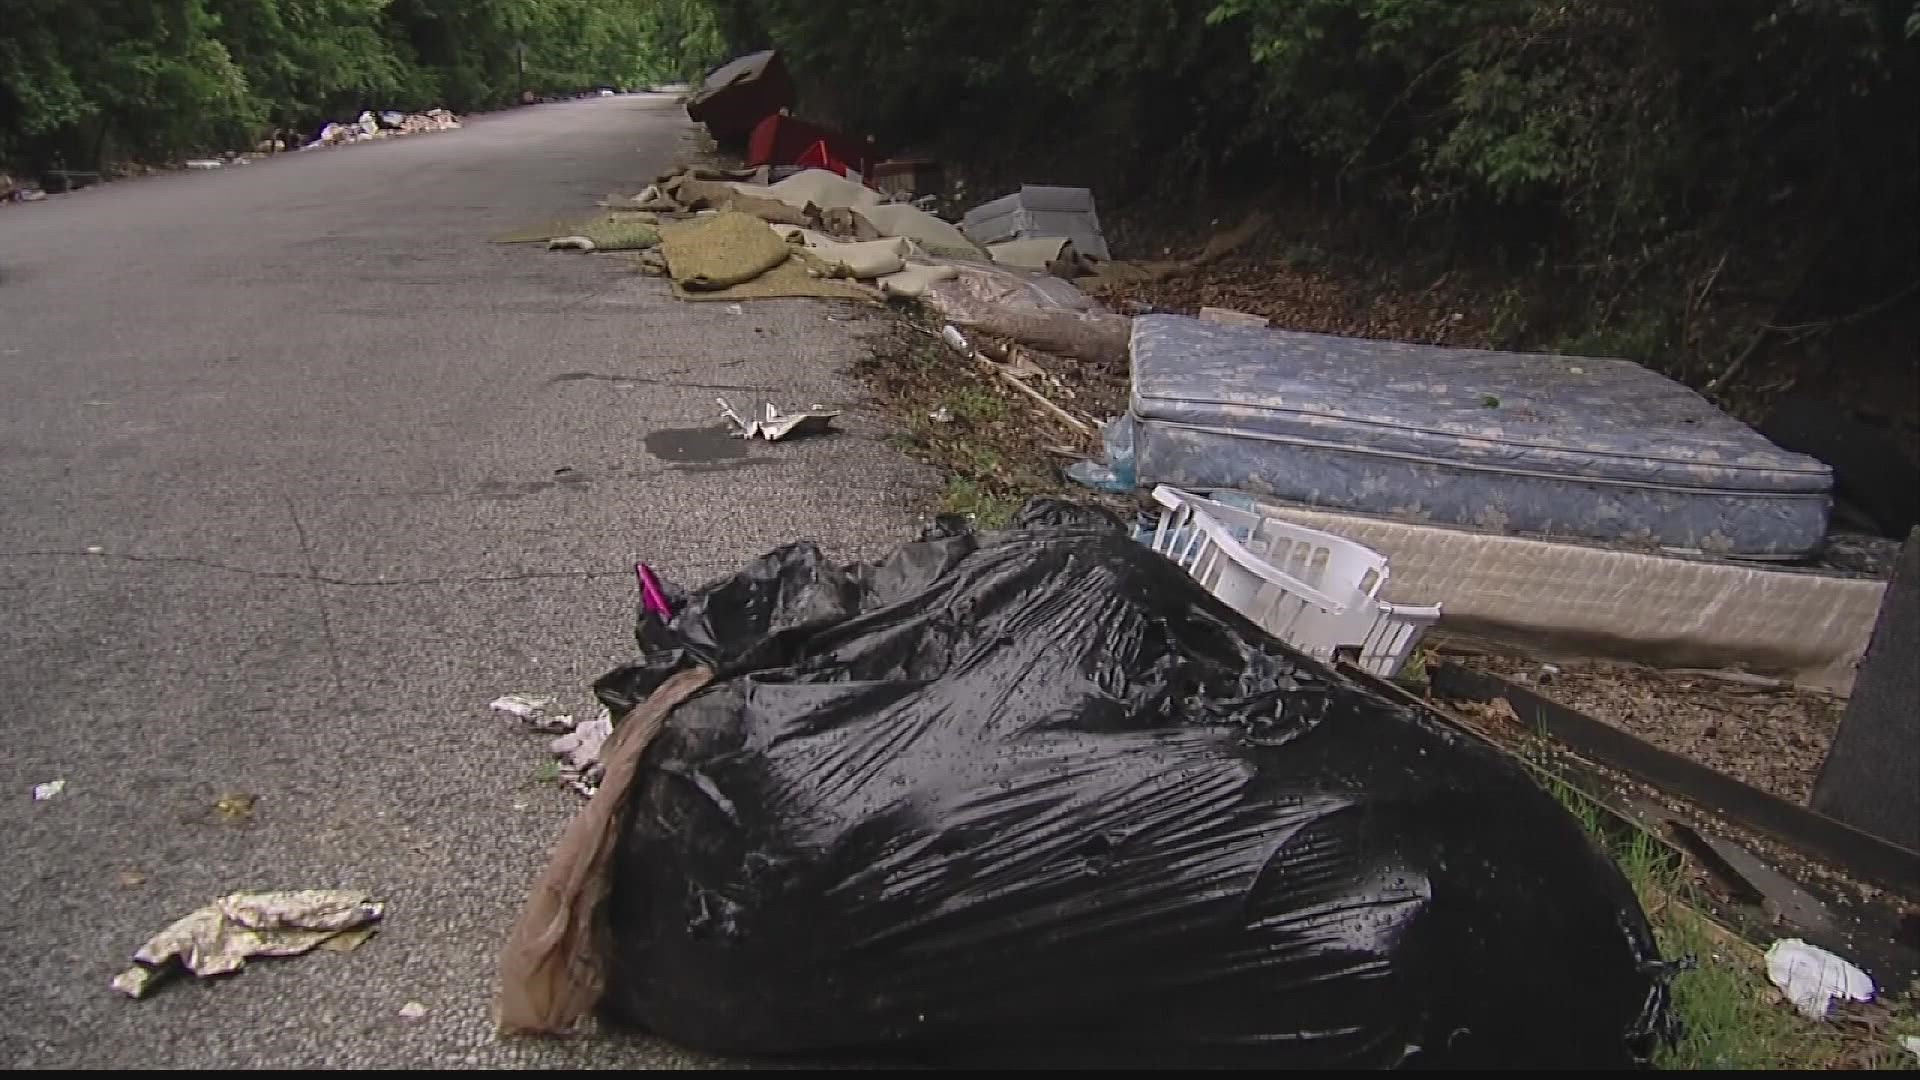 Trash is being dumped illegally in Atlanta neighborhoods, attracting rats and coyotes and raising concerns about sanitation and diseases.